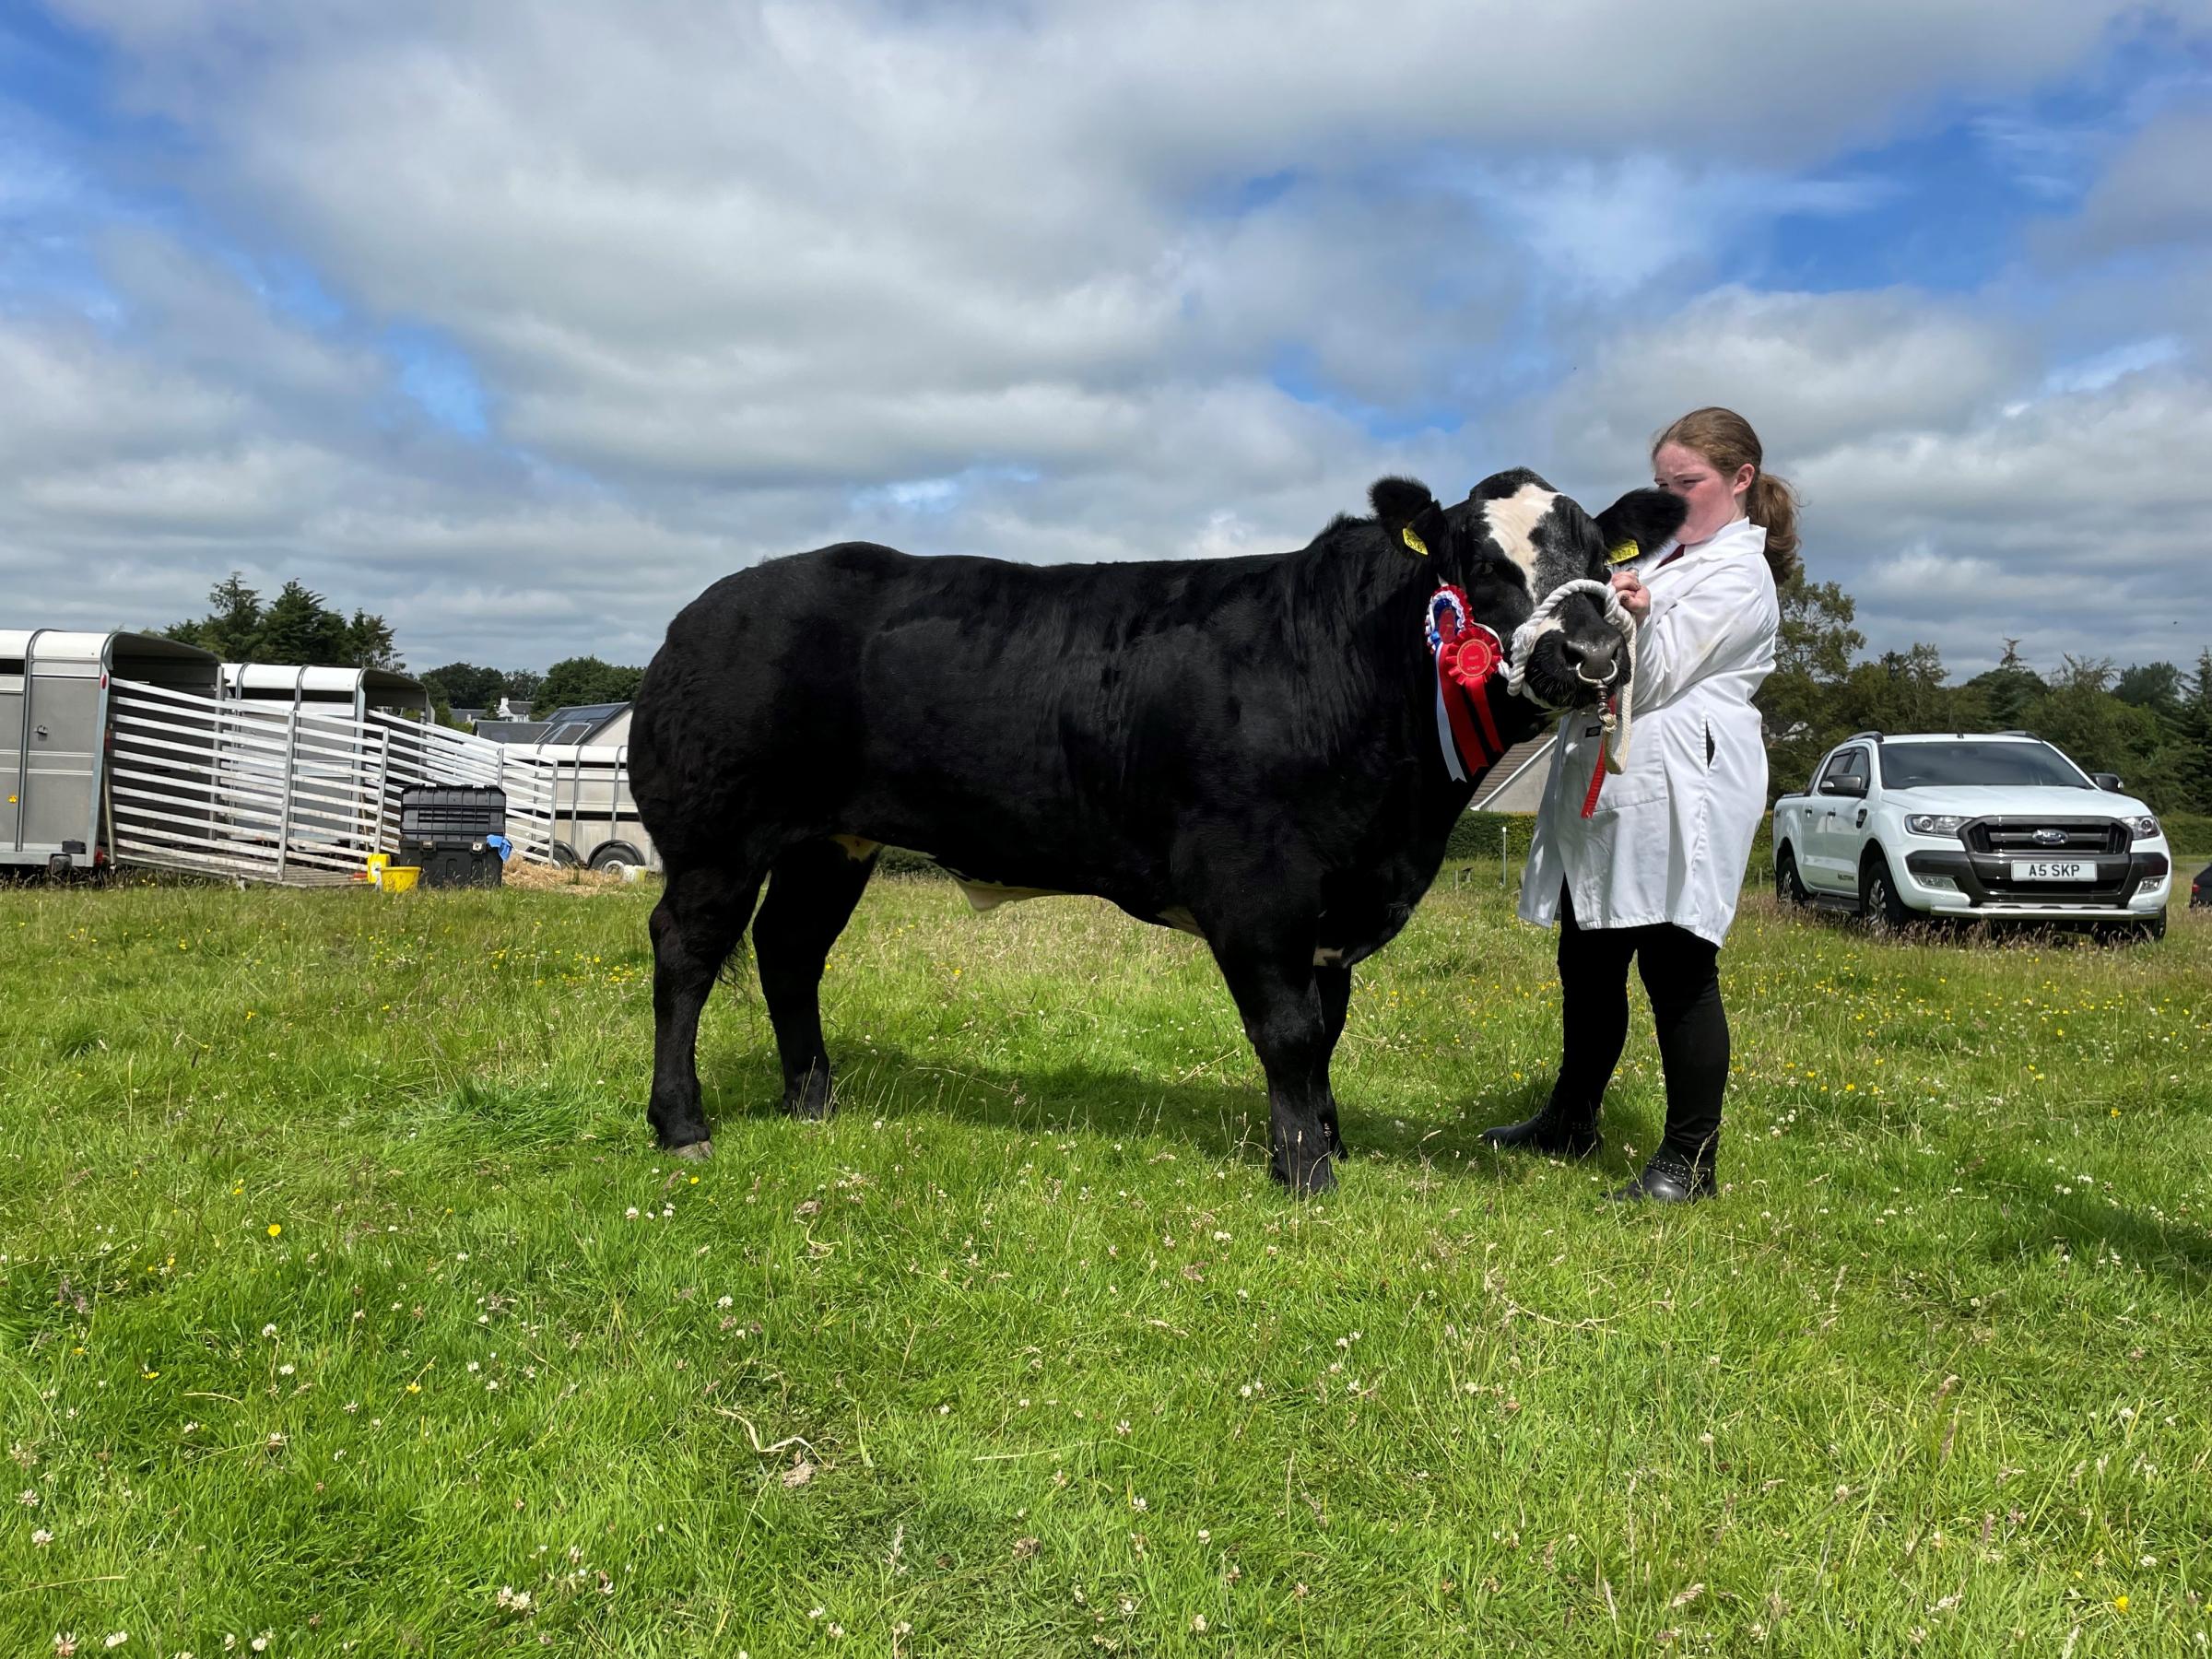 Louise Kerr produced the prime cattle champion, which stood reserve beef champion 